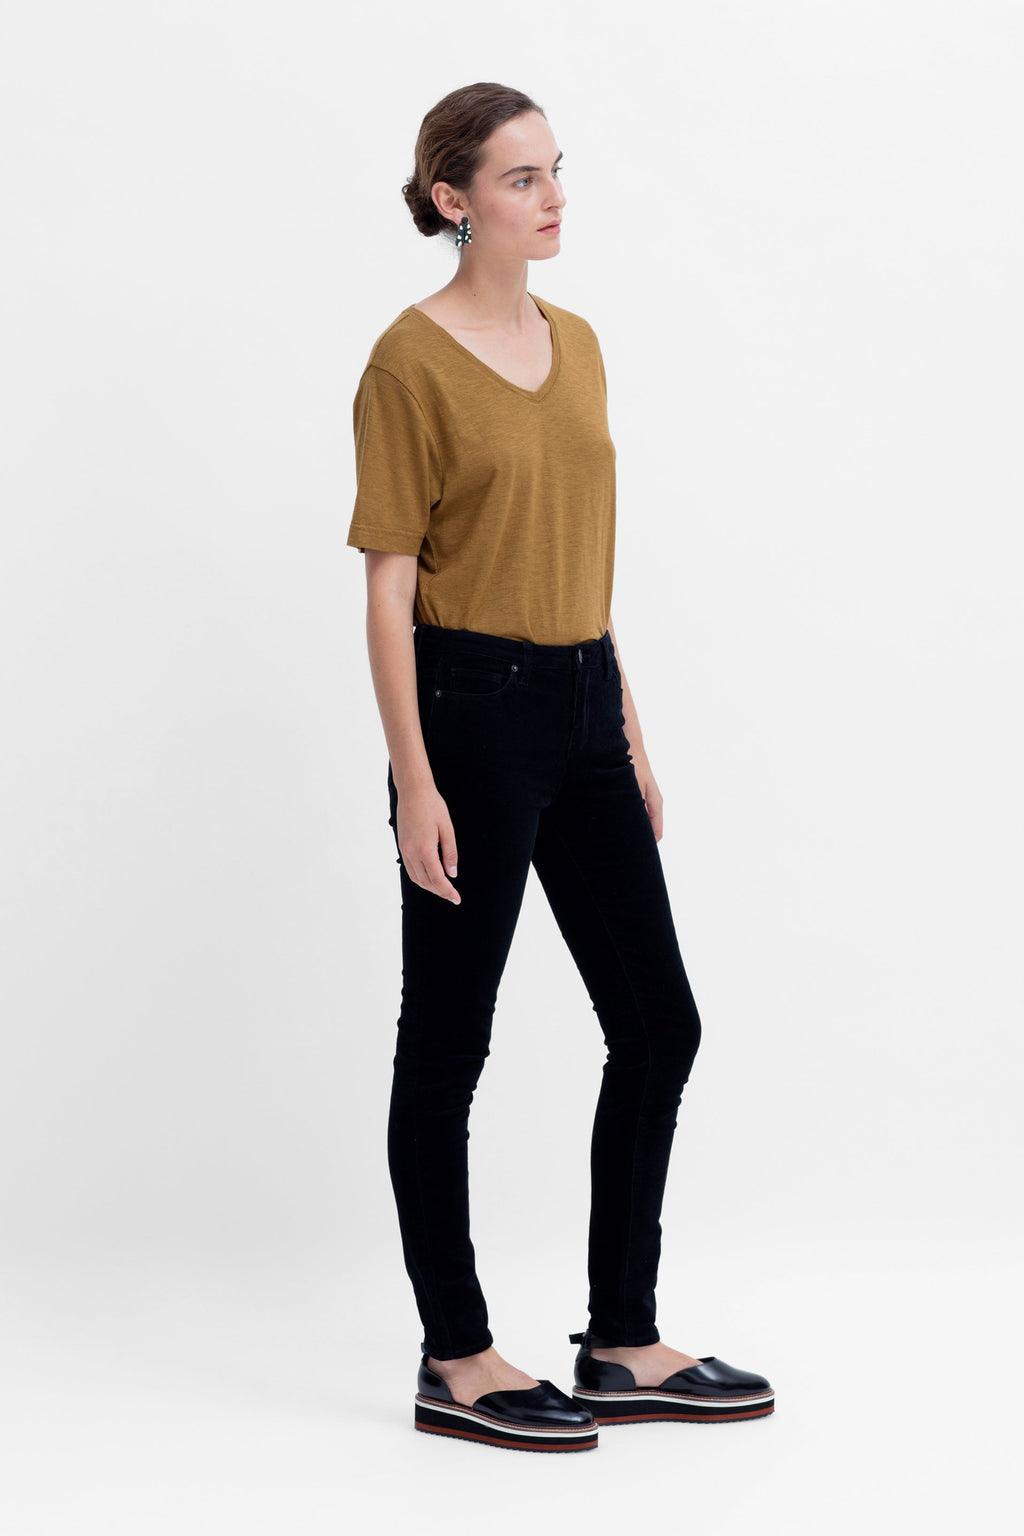 Now at Outline Clothing Geraldine - The Vand Cord Jean is a mid-rise, five pocket style with a skinny leg fit. The fine corduroy is a more contemporary interpretation of this classic style,